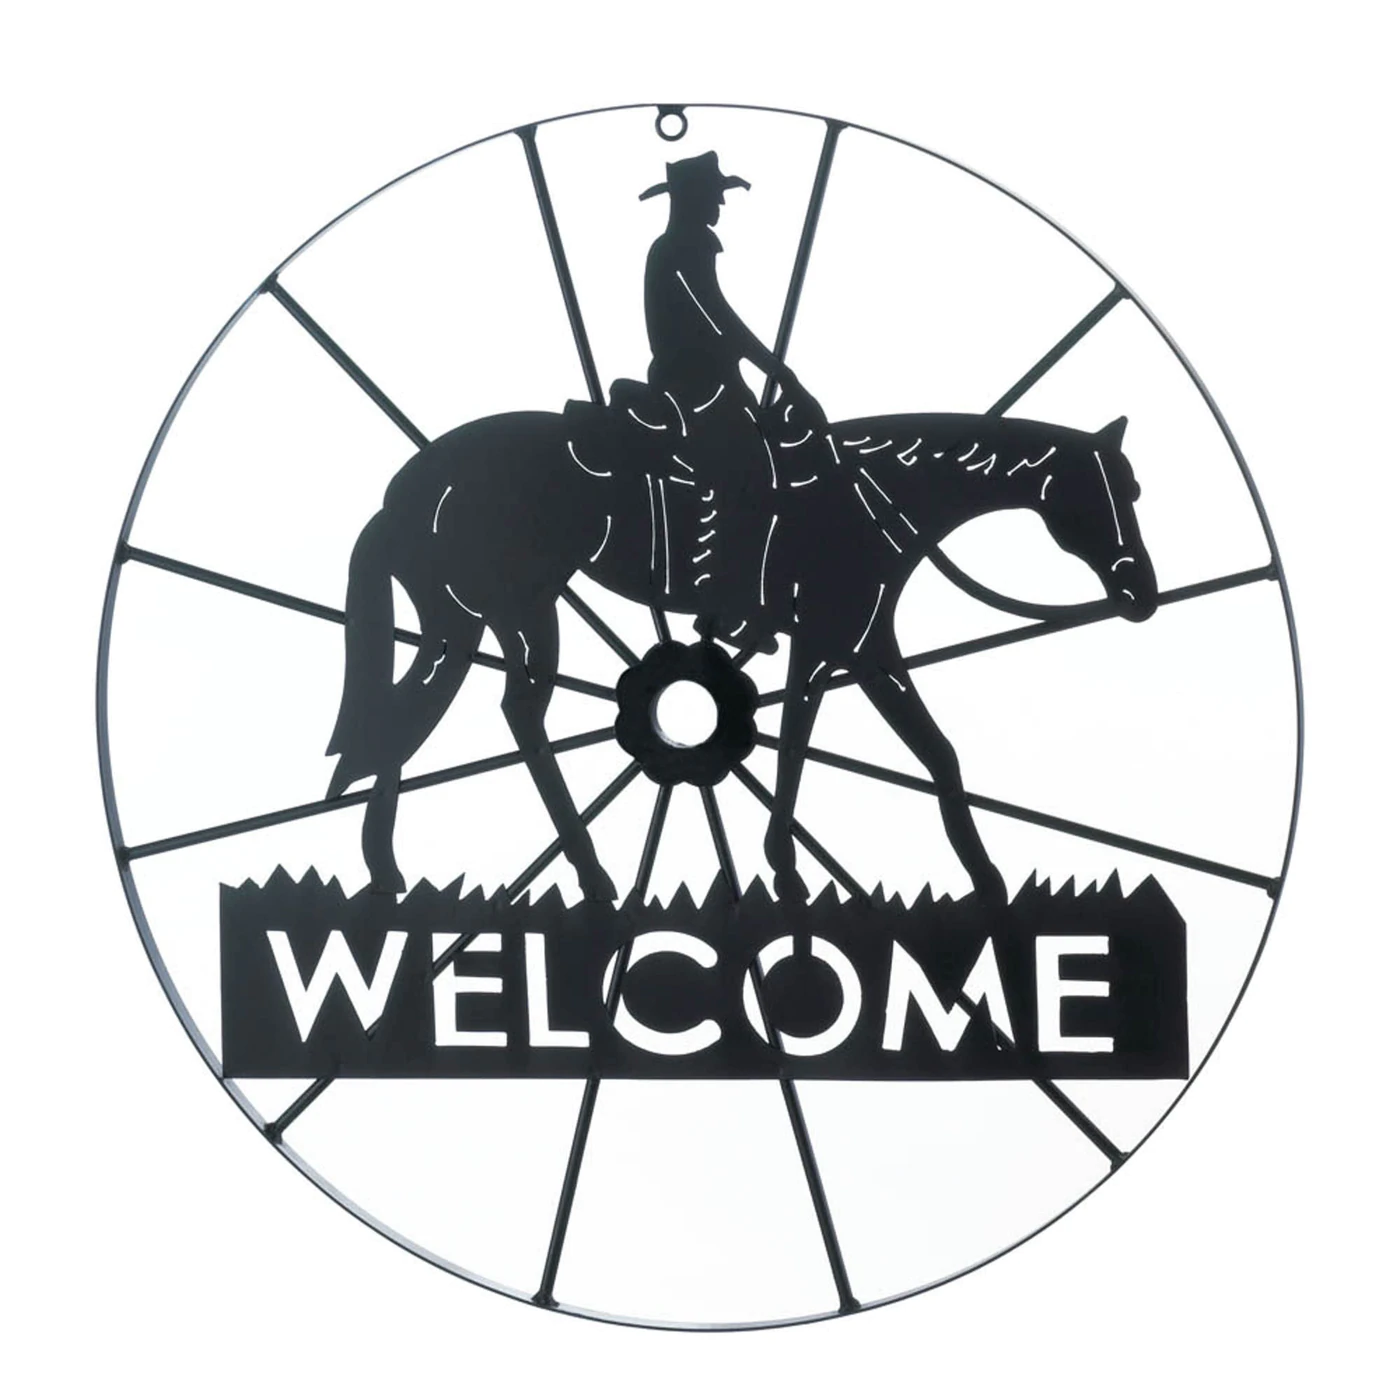 Cowboy Welcome Wheel Sign - $45.60